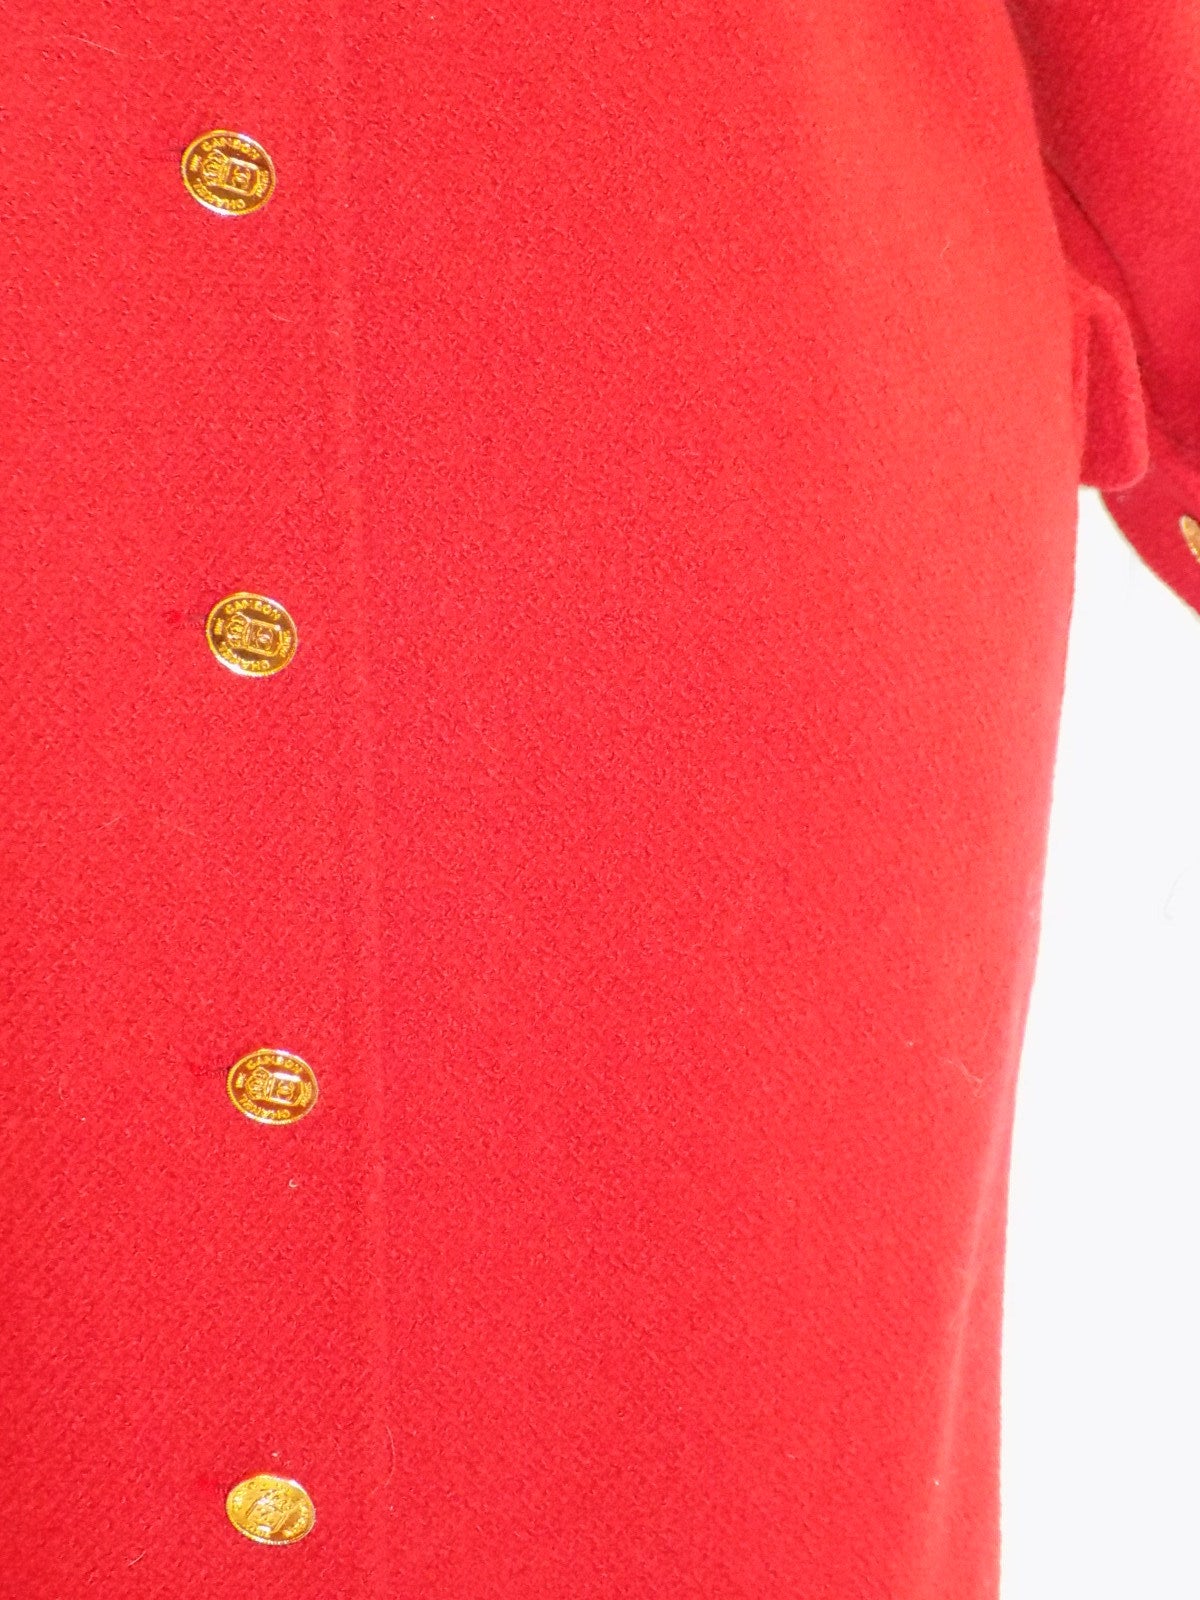 Chanel Vintage Red Coat with large logo buttons 2